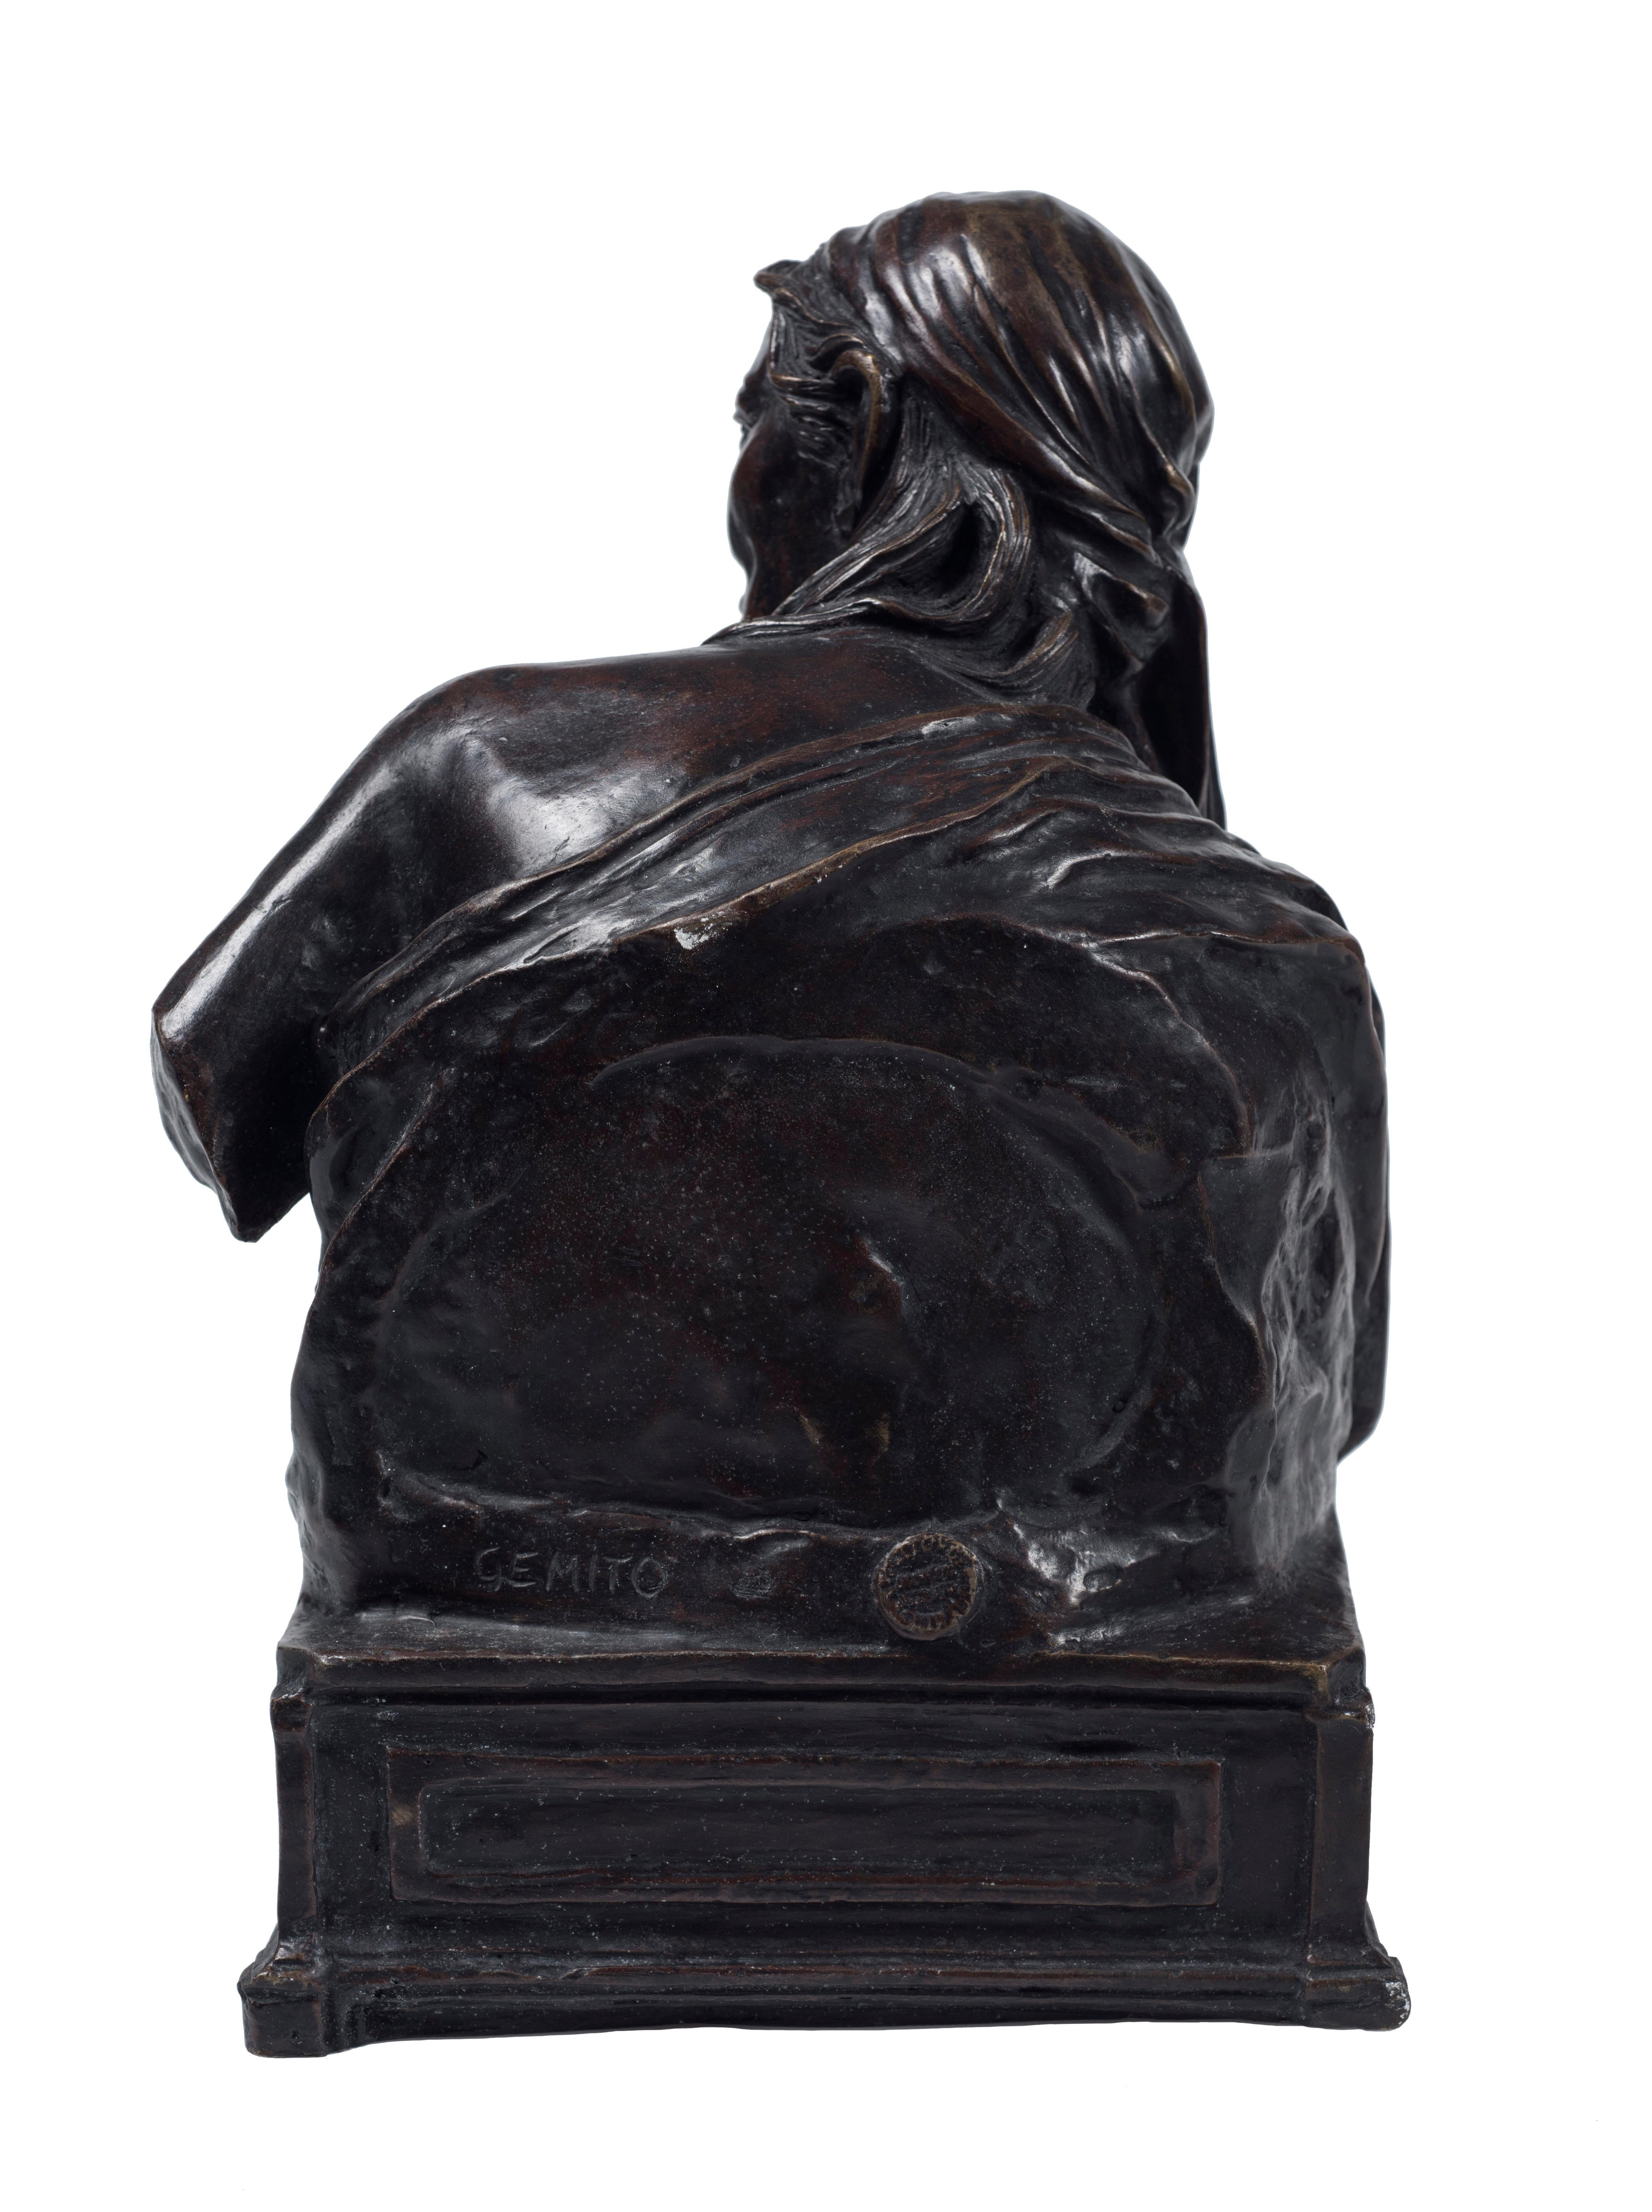 The Sibyl is an original sculpture realized by Vincenzo Gemito.

Dark glazed bronze sculpture. Signature of the artist on the back. Stamp of Foundry.

Very good conditions.

Vincenzo Gemito (Naples, 1852 – 1929) was an Italian sculptor and artist.